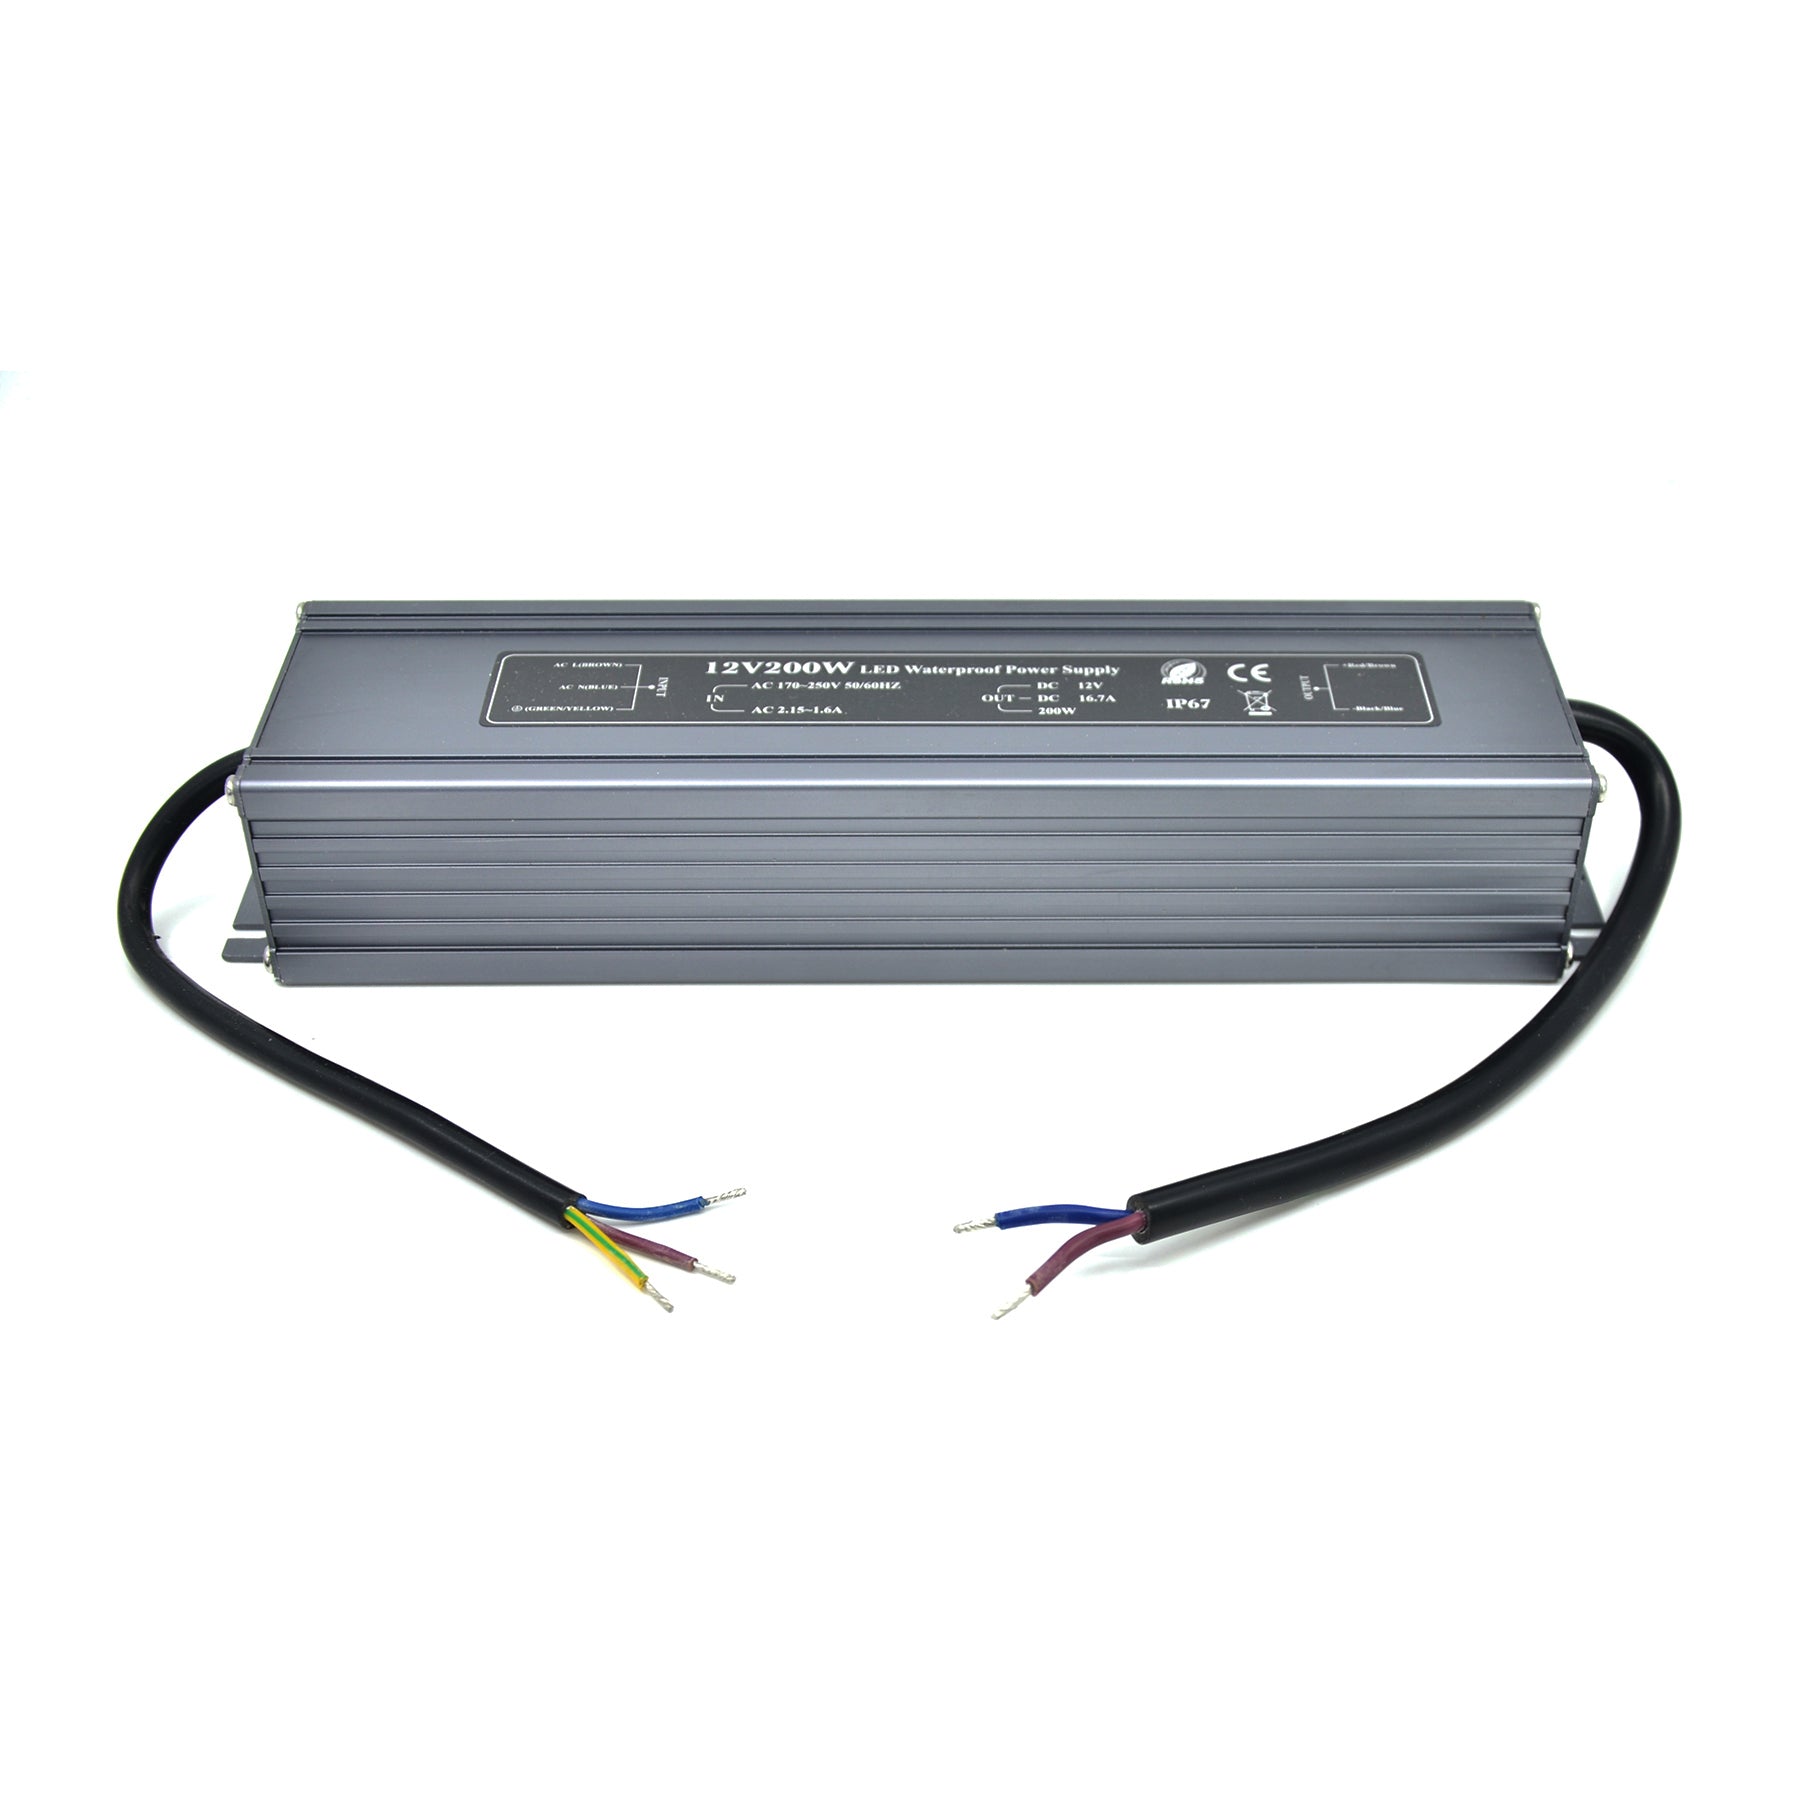  LED Power Supply 200W High-powerTransformer Waterproof IP67 12V  DC Driver Adapter for Outdoor Use : Electronics